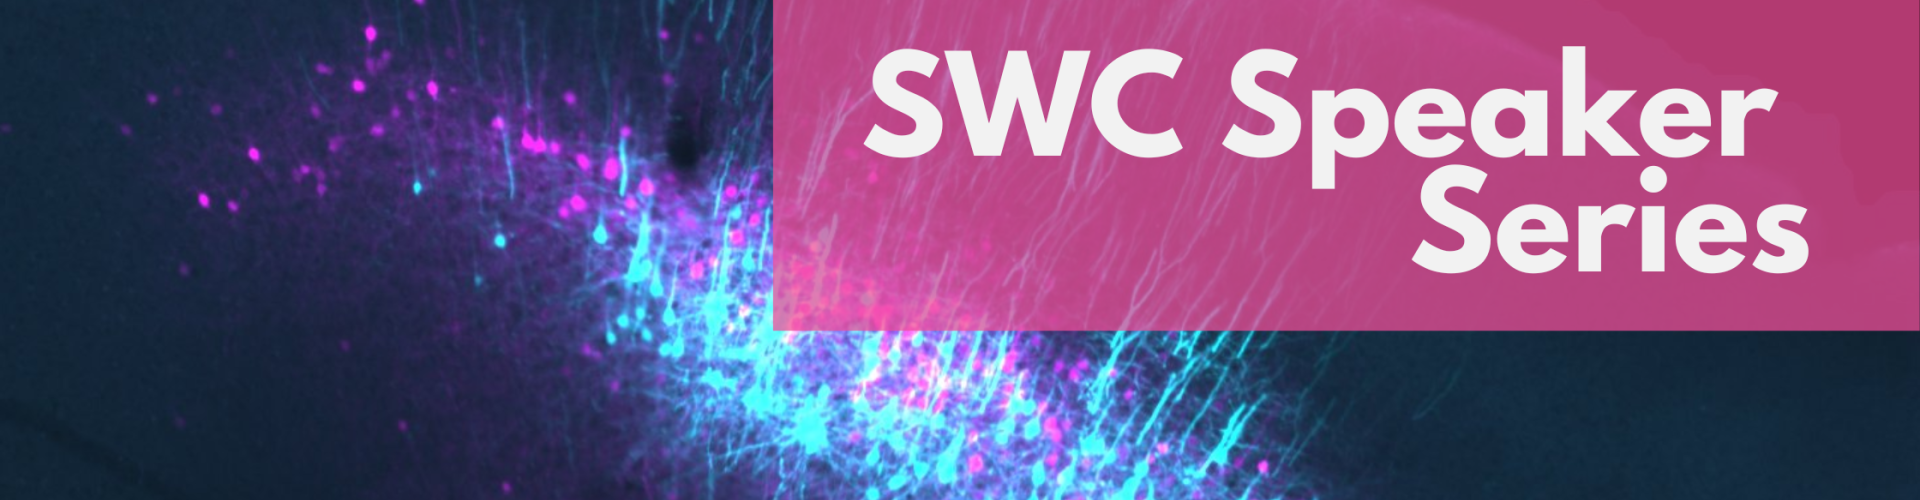 Image of two populations of neurons in the motor cortex that relay information to the striatum with text overlaid "SWC Speaker Series"